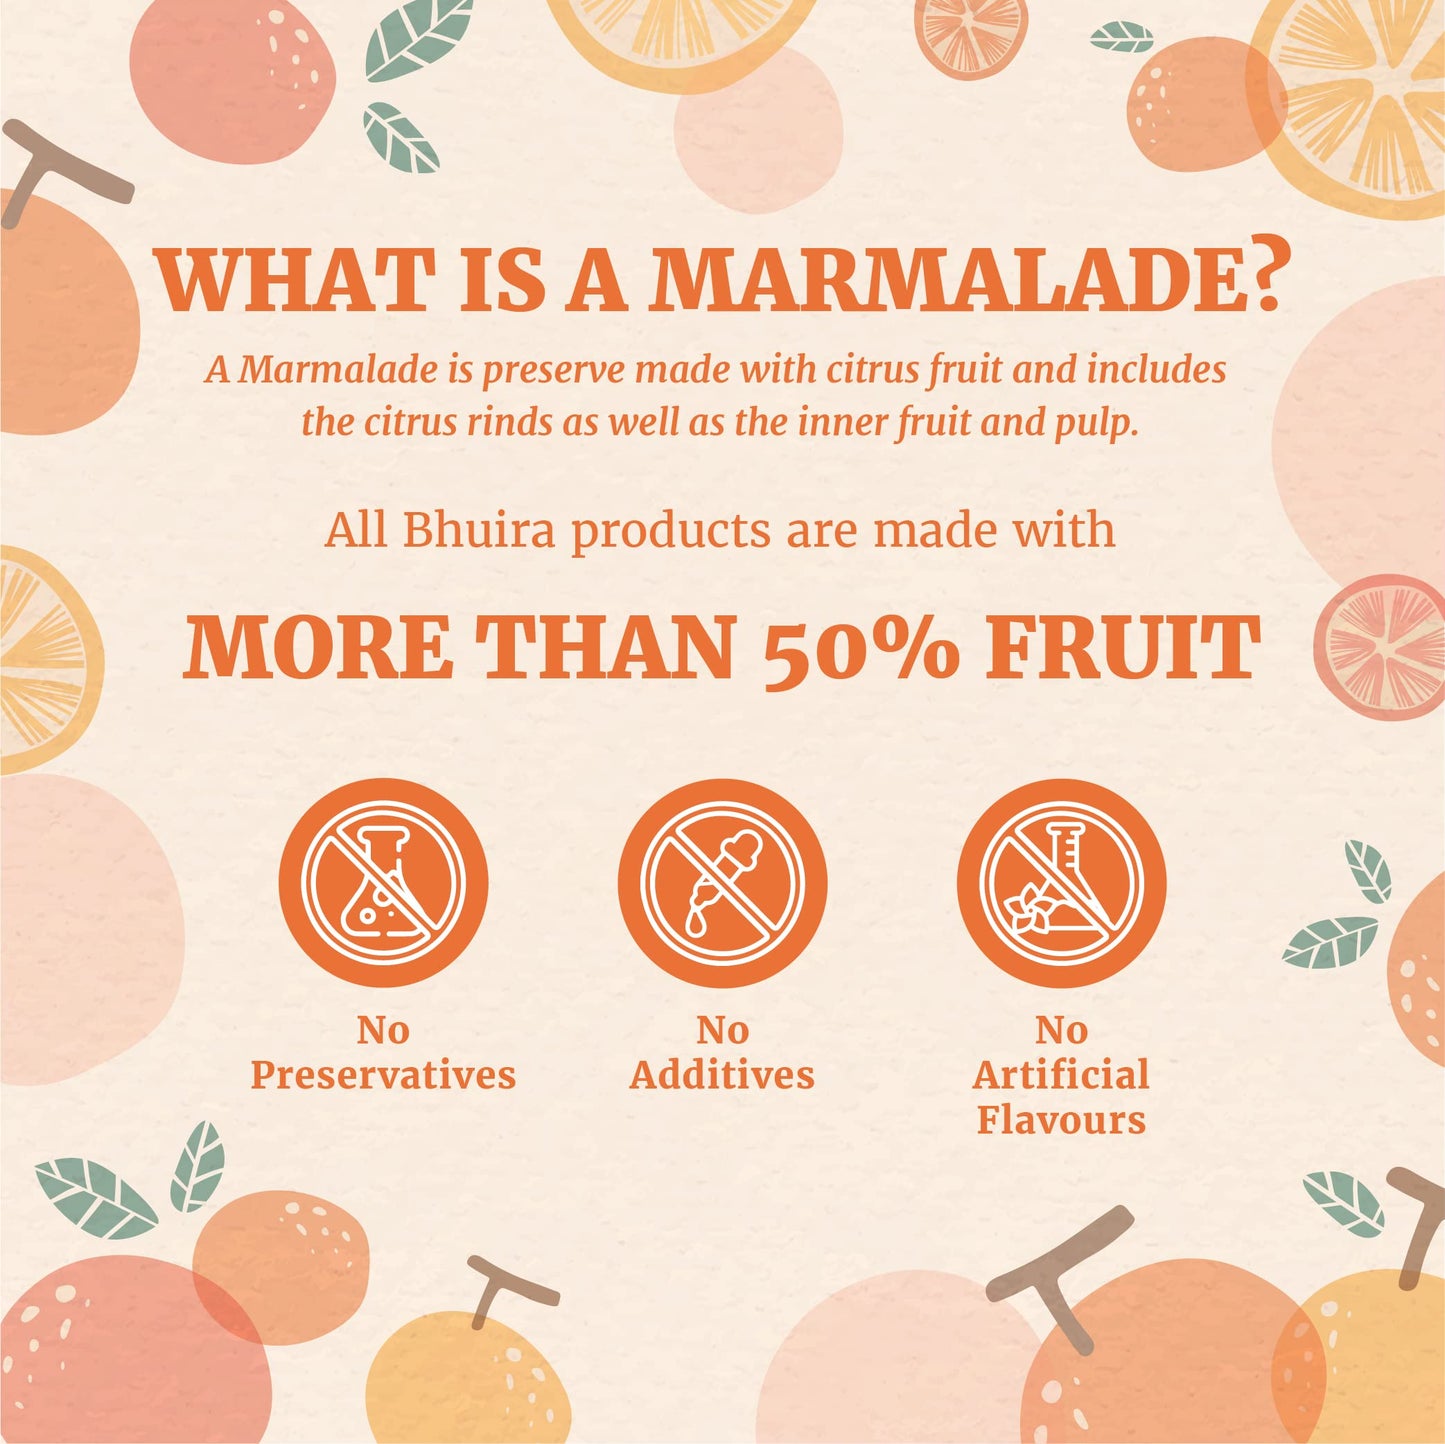 Bhuira|All Natural Jam Three Fruit Marmalade|No Added preservatives|No Artifical Color Added|240 g|Pack of 1